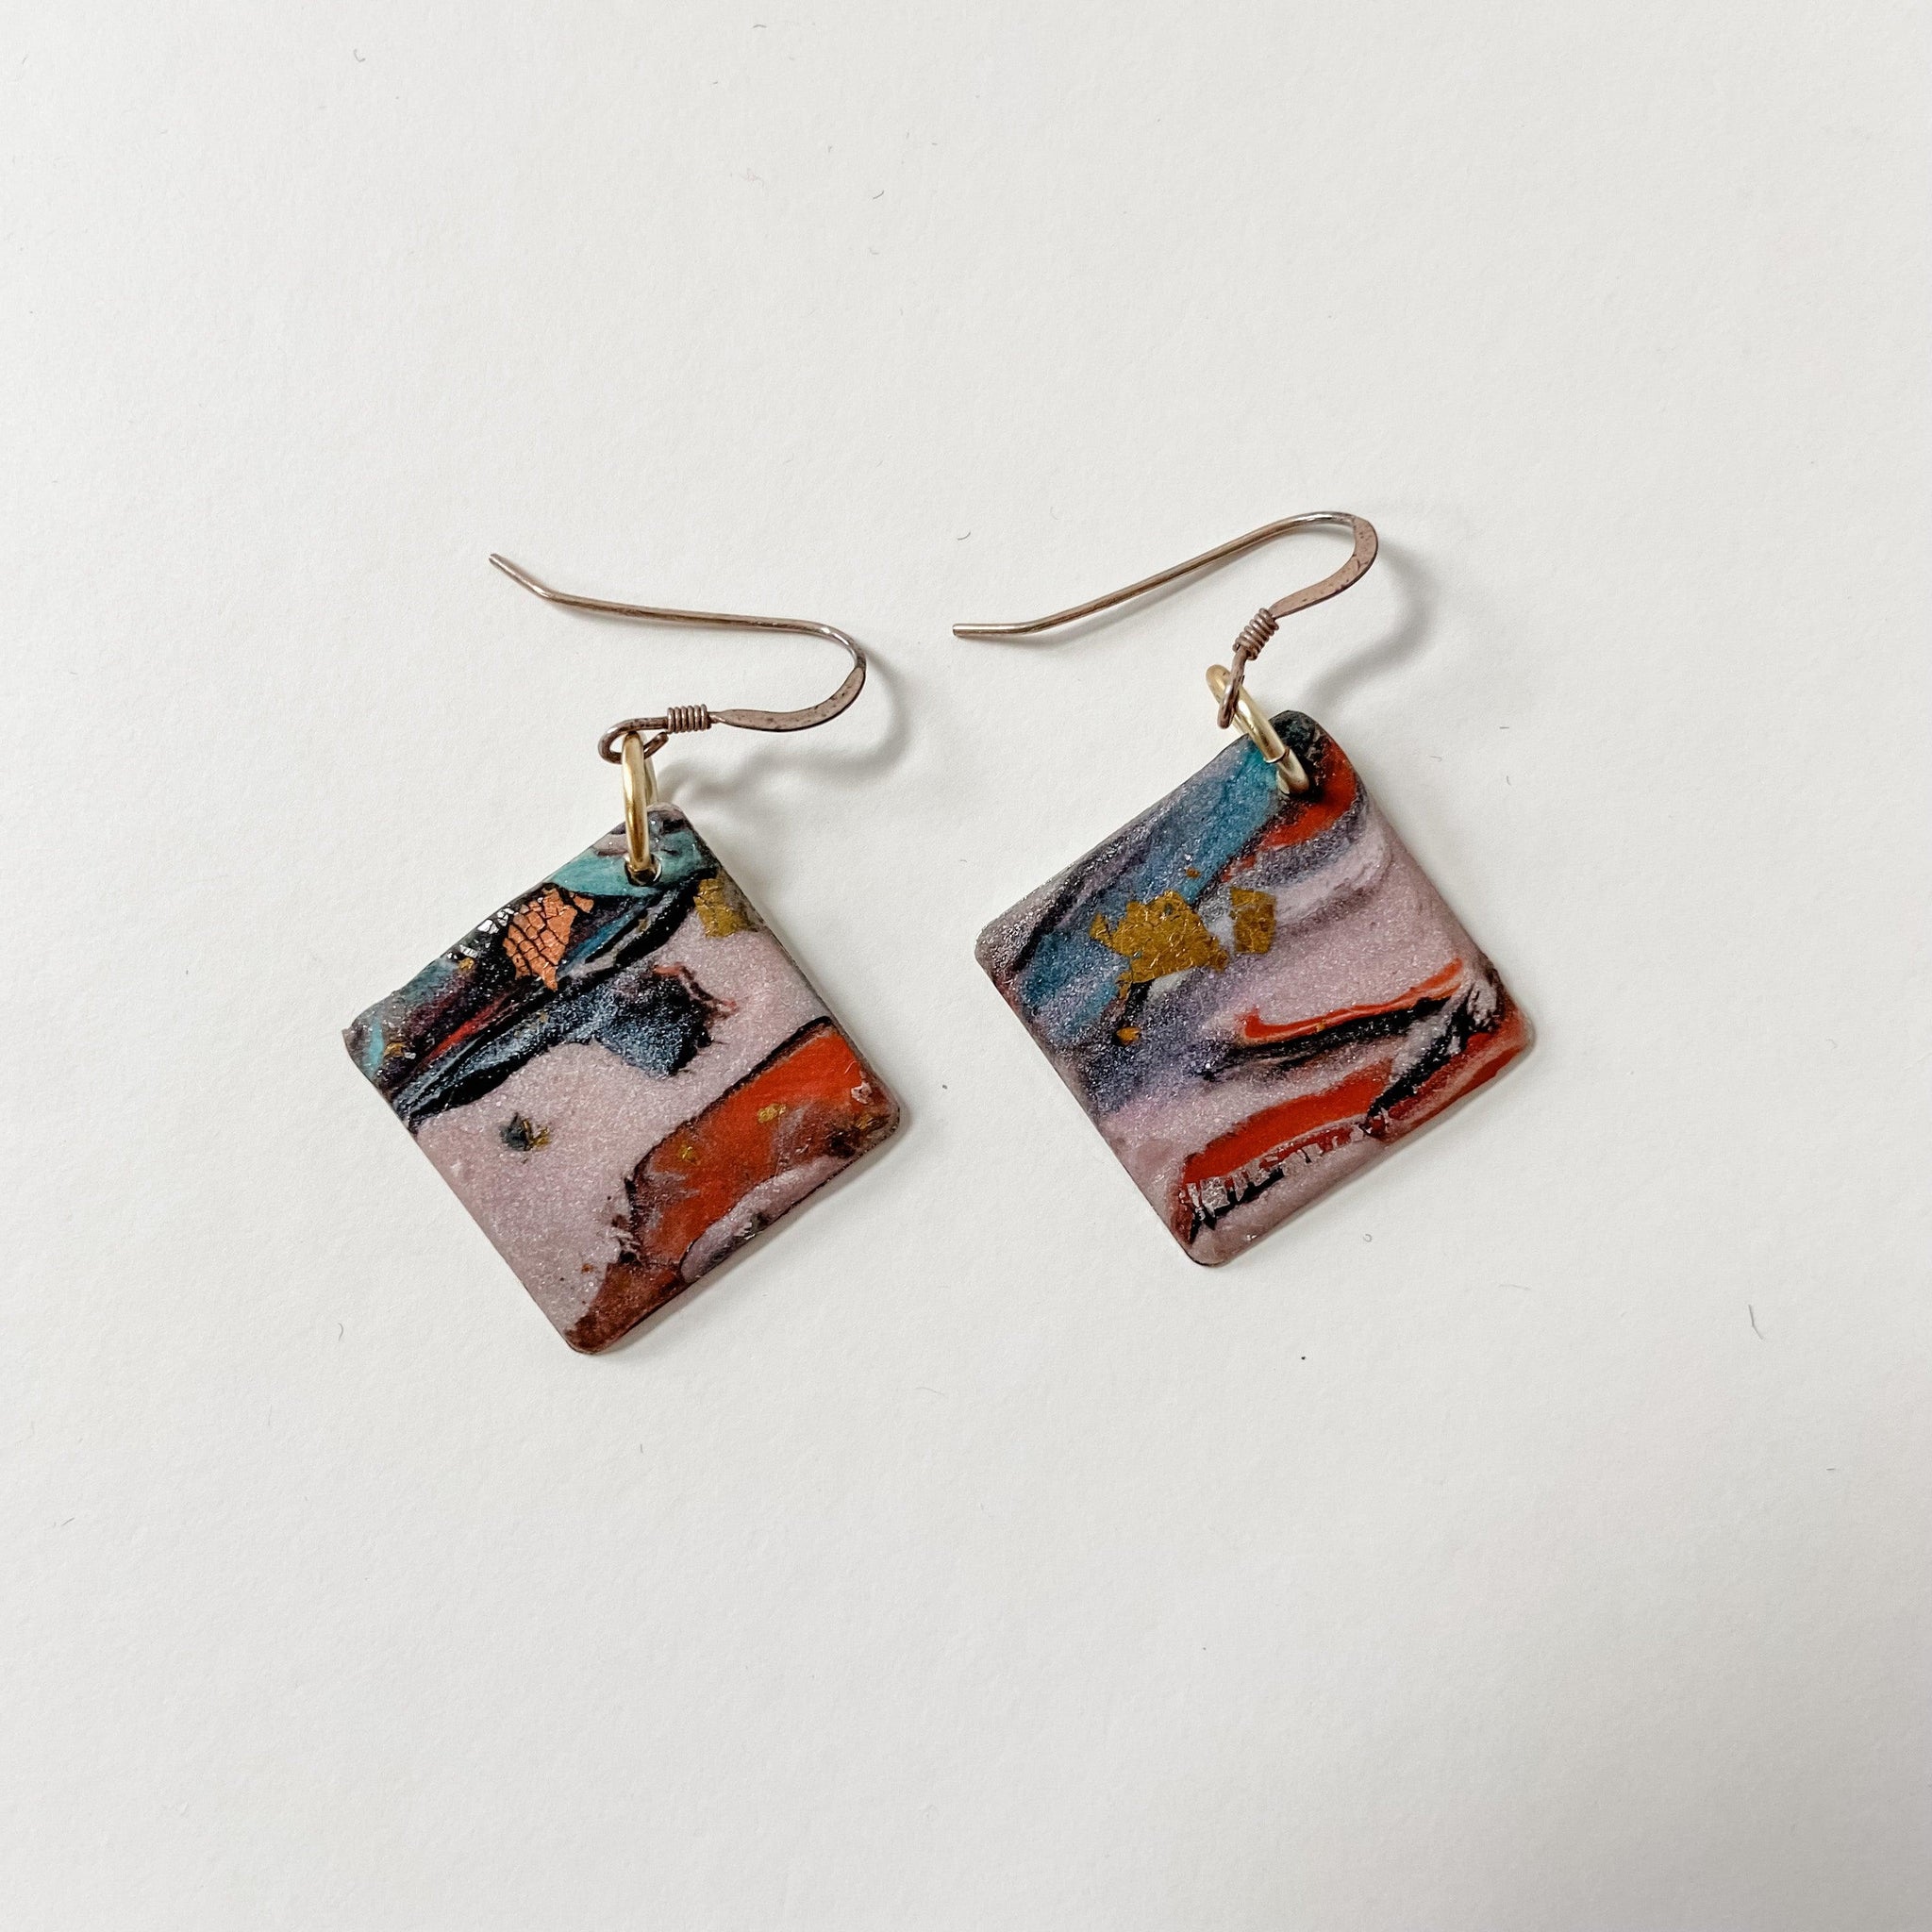 Square Polymer Clay  Earrings - Uni-T